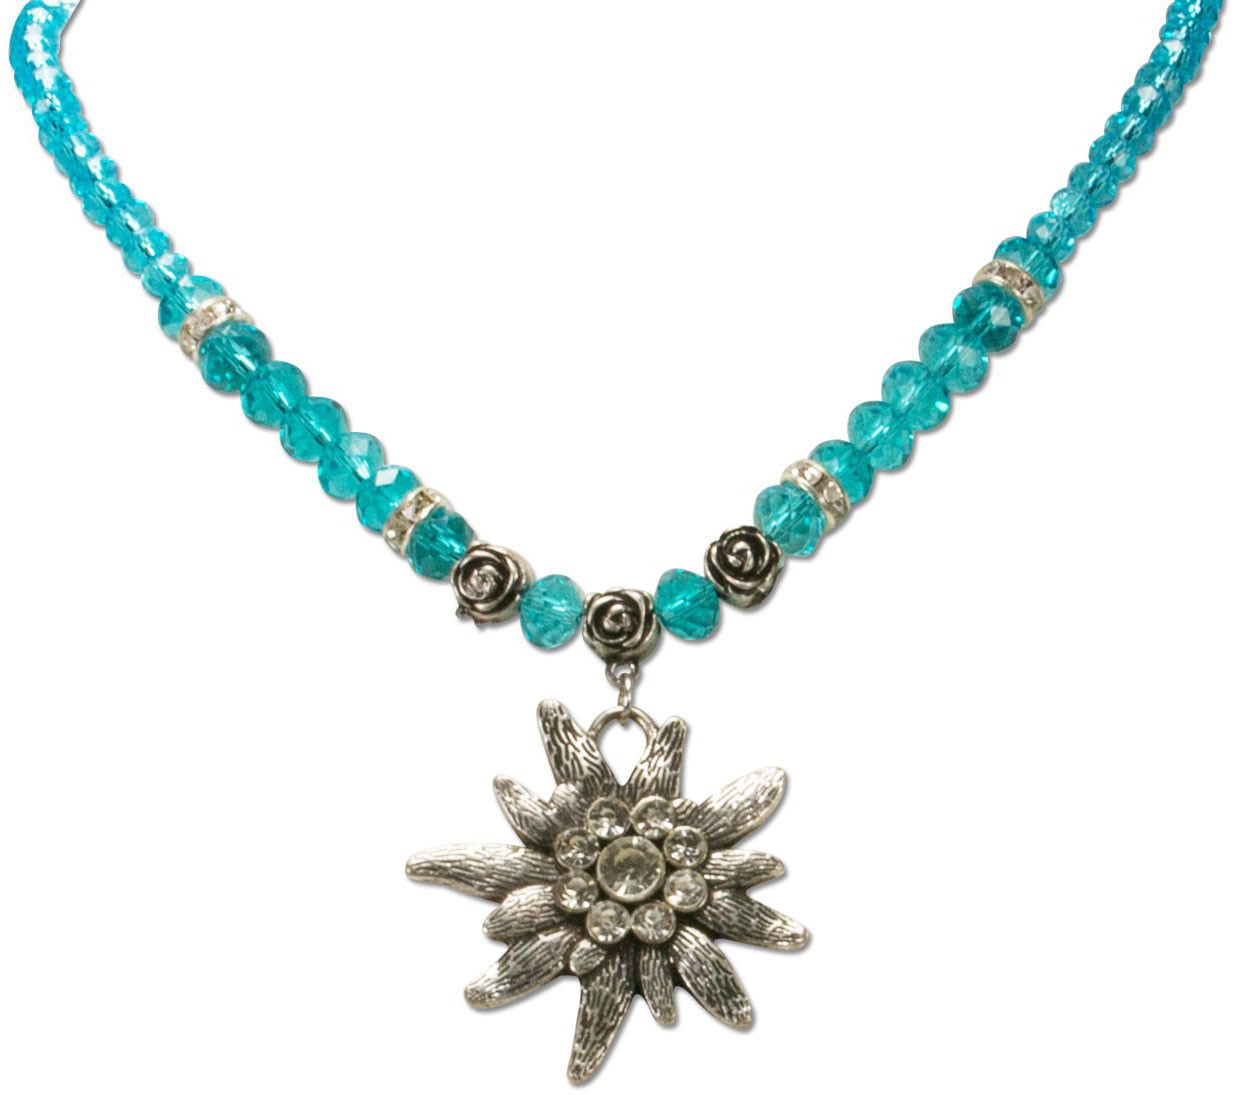 Preview: Traditional Necklace large Edelweiß turquoise